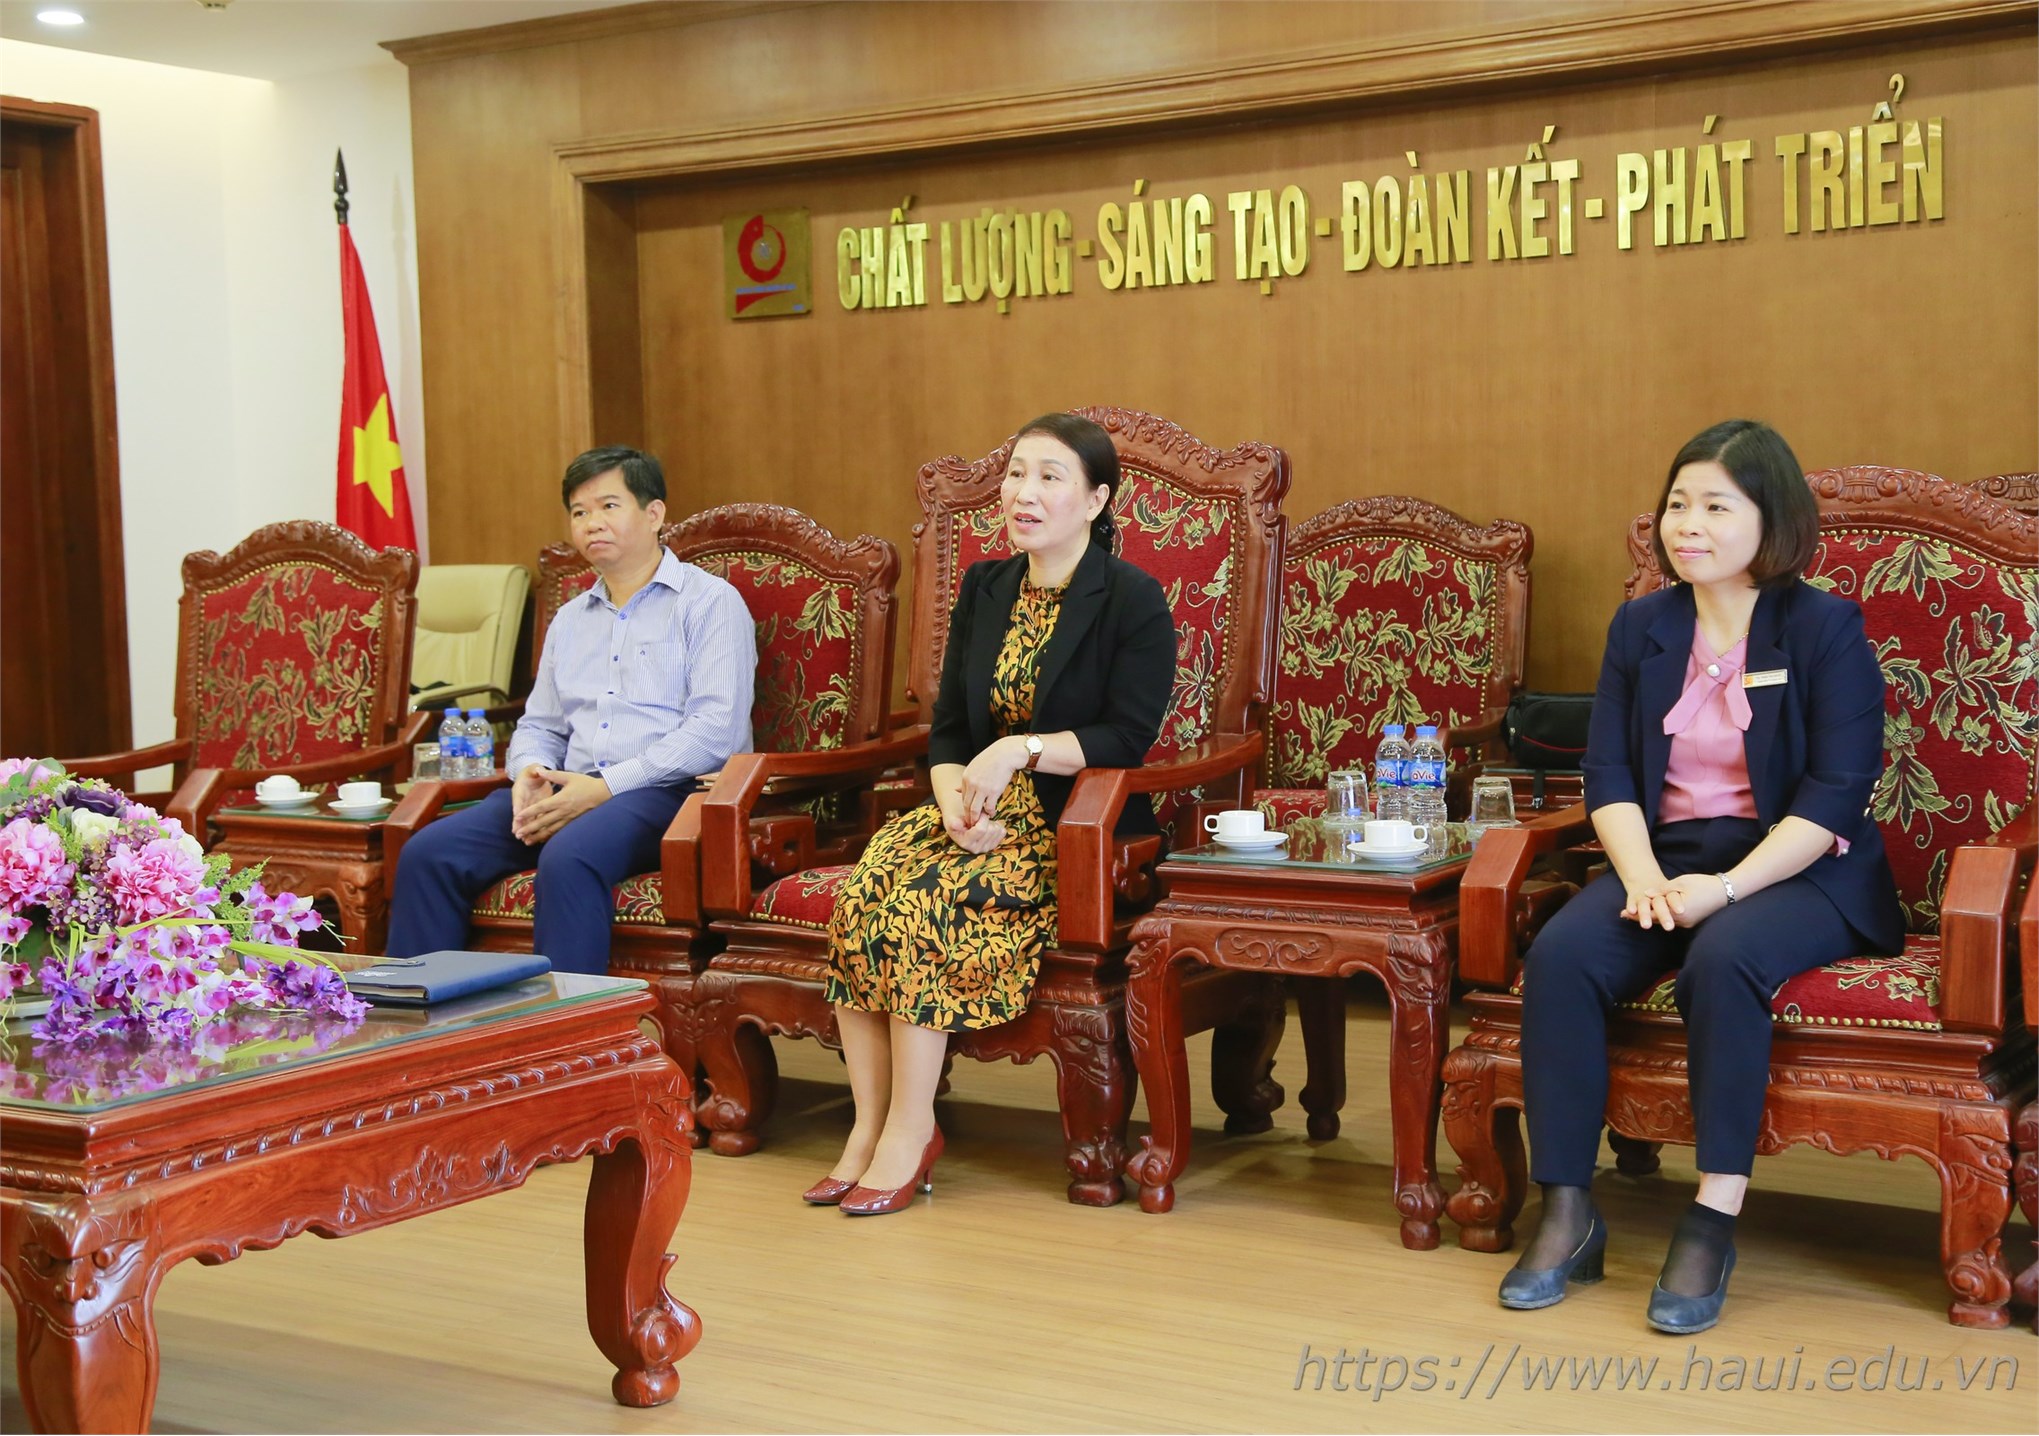 Director of the Regional English Language Office - The U.S. Embassy in Vietnam paid a working visit to HaUI